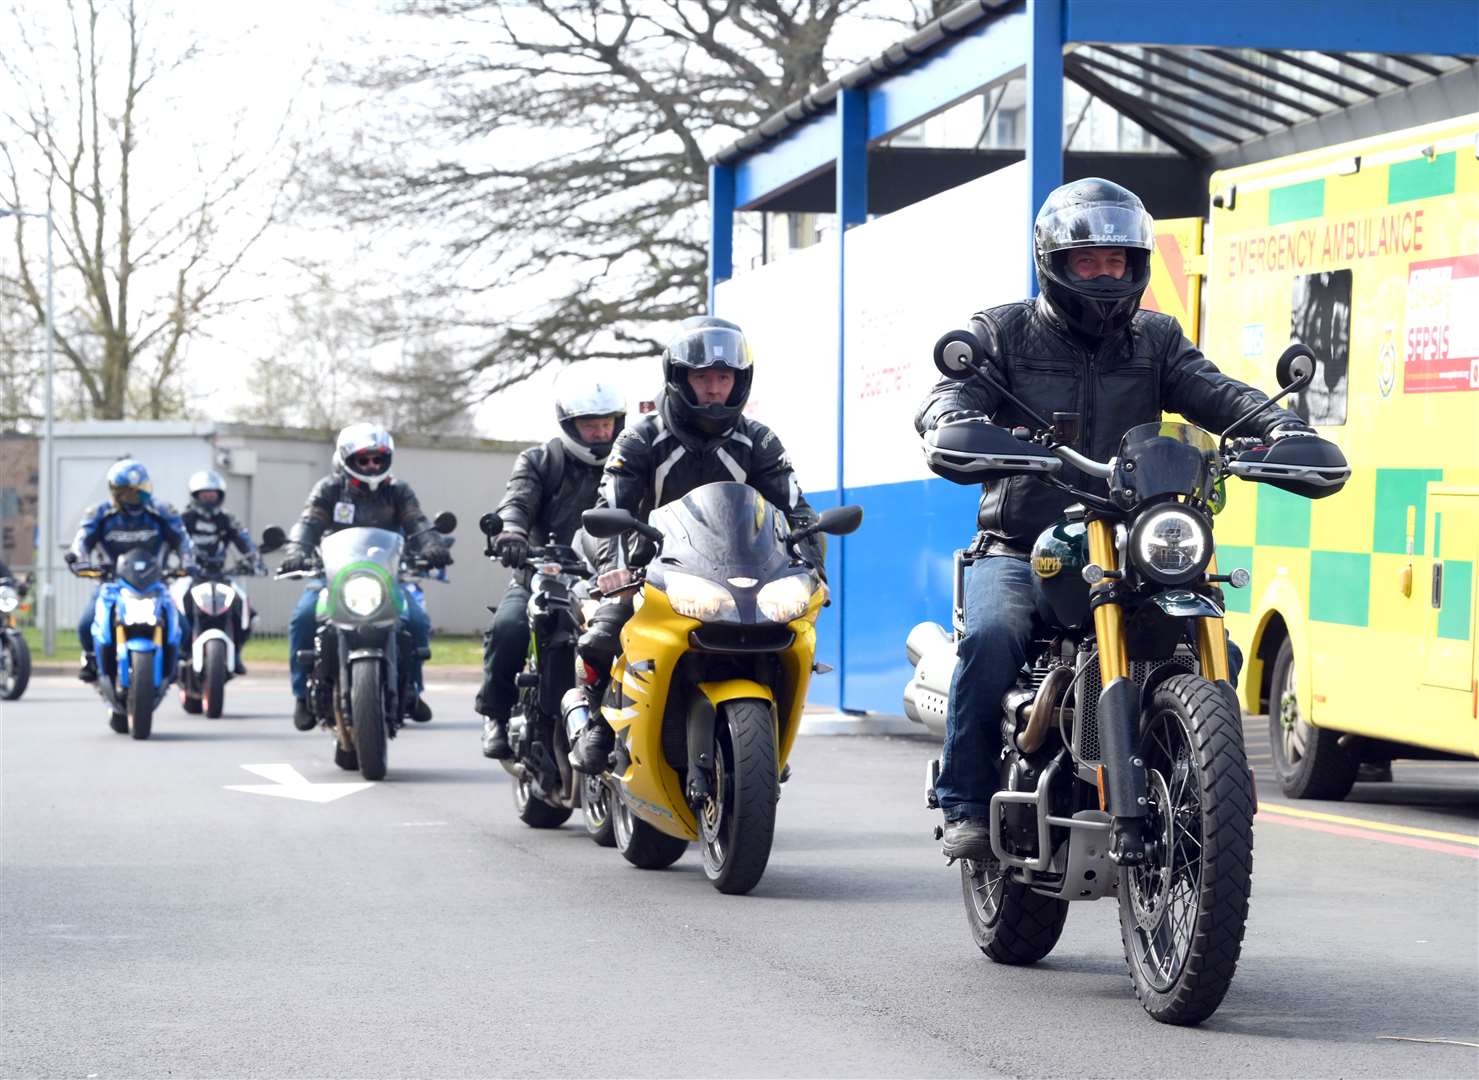 Freewheel cruise riders association delivering East Eggs to children at QEH